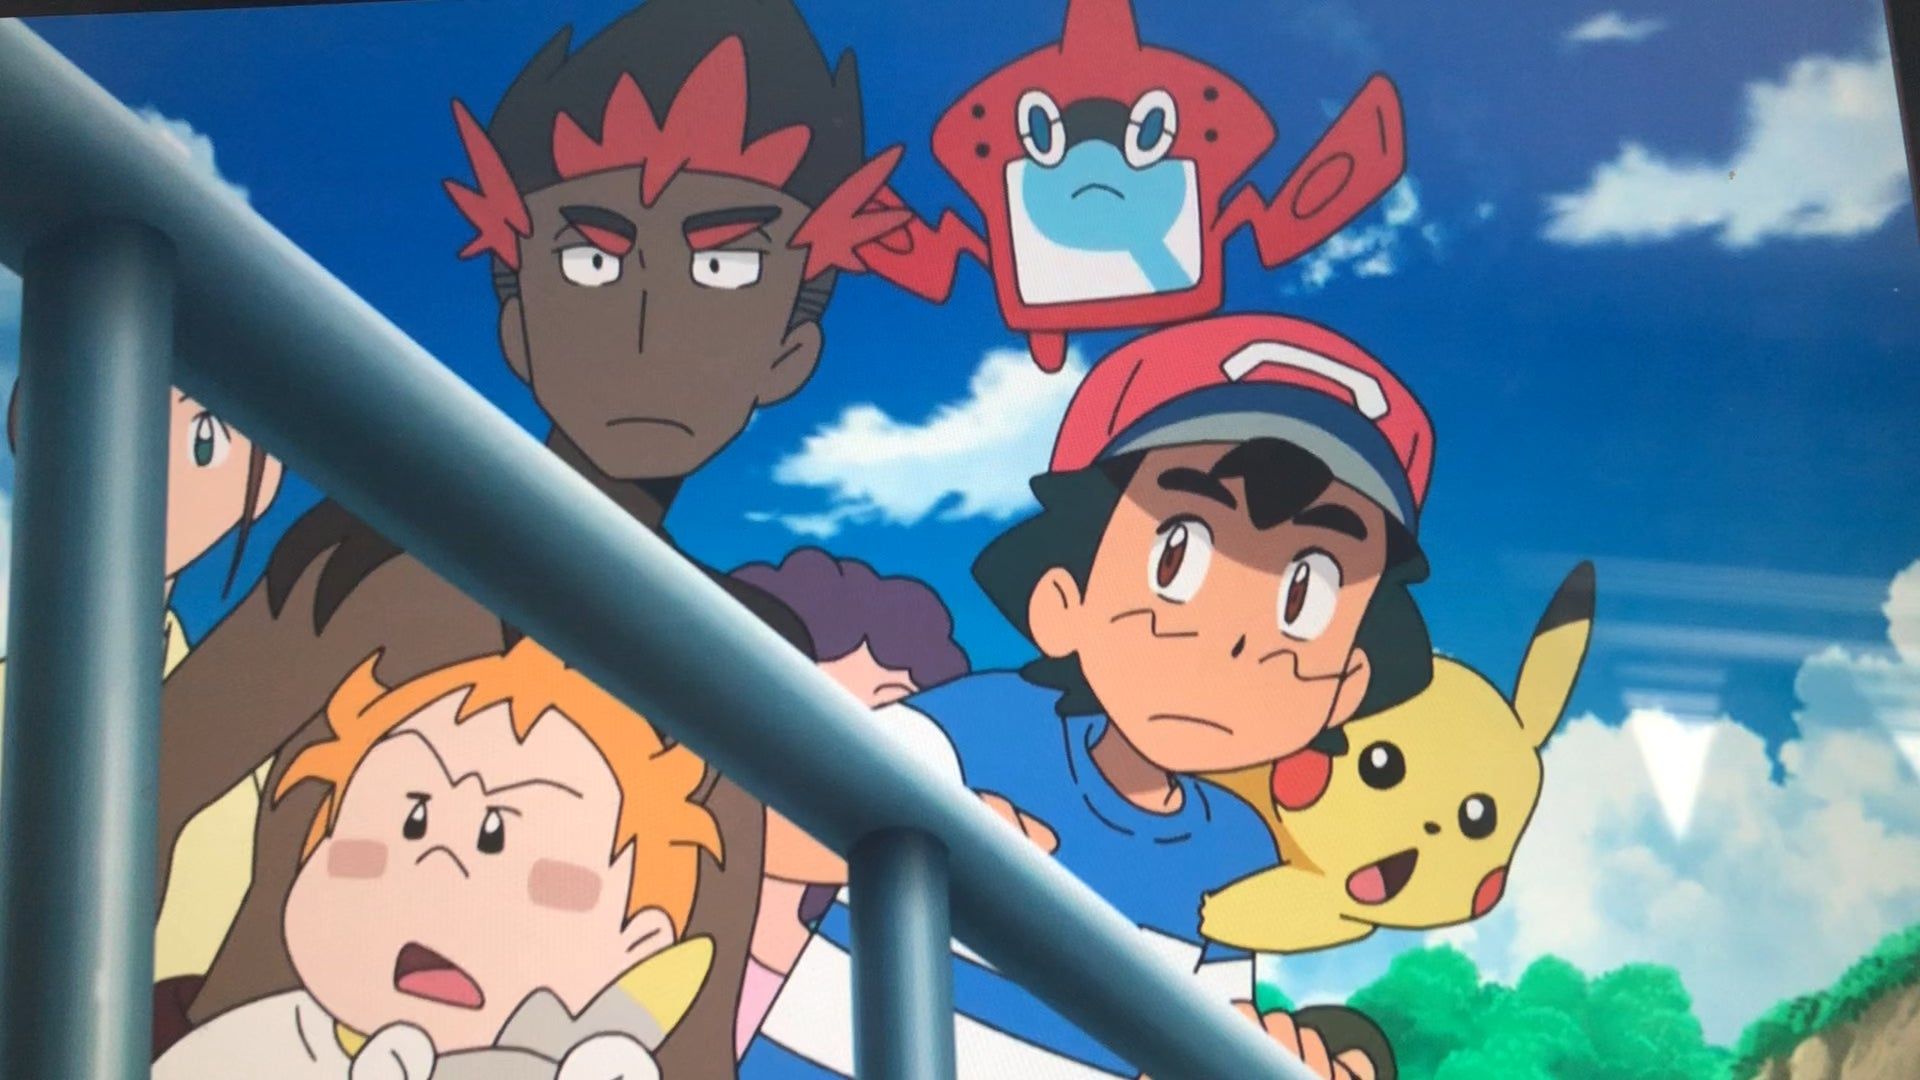 Ash, literally all your league matches were televised, and you made it to the finals of the Kalos league